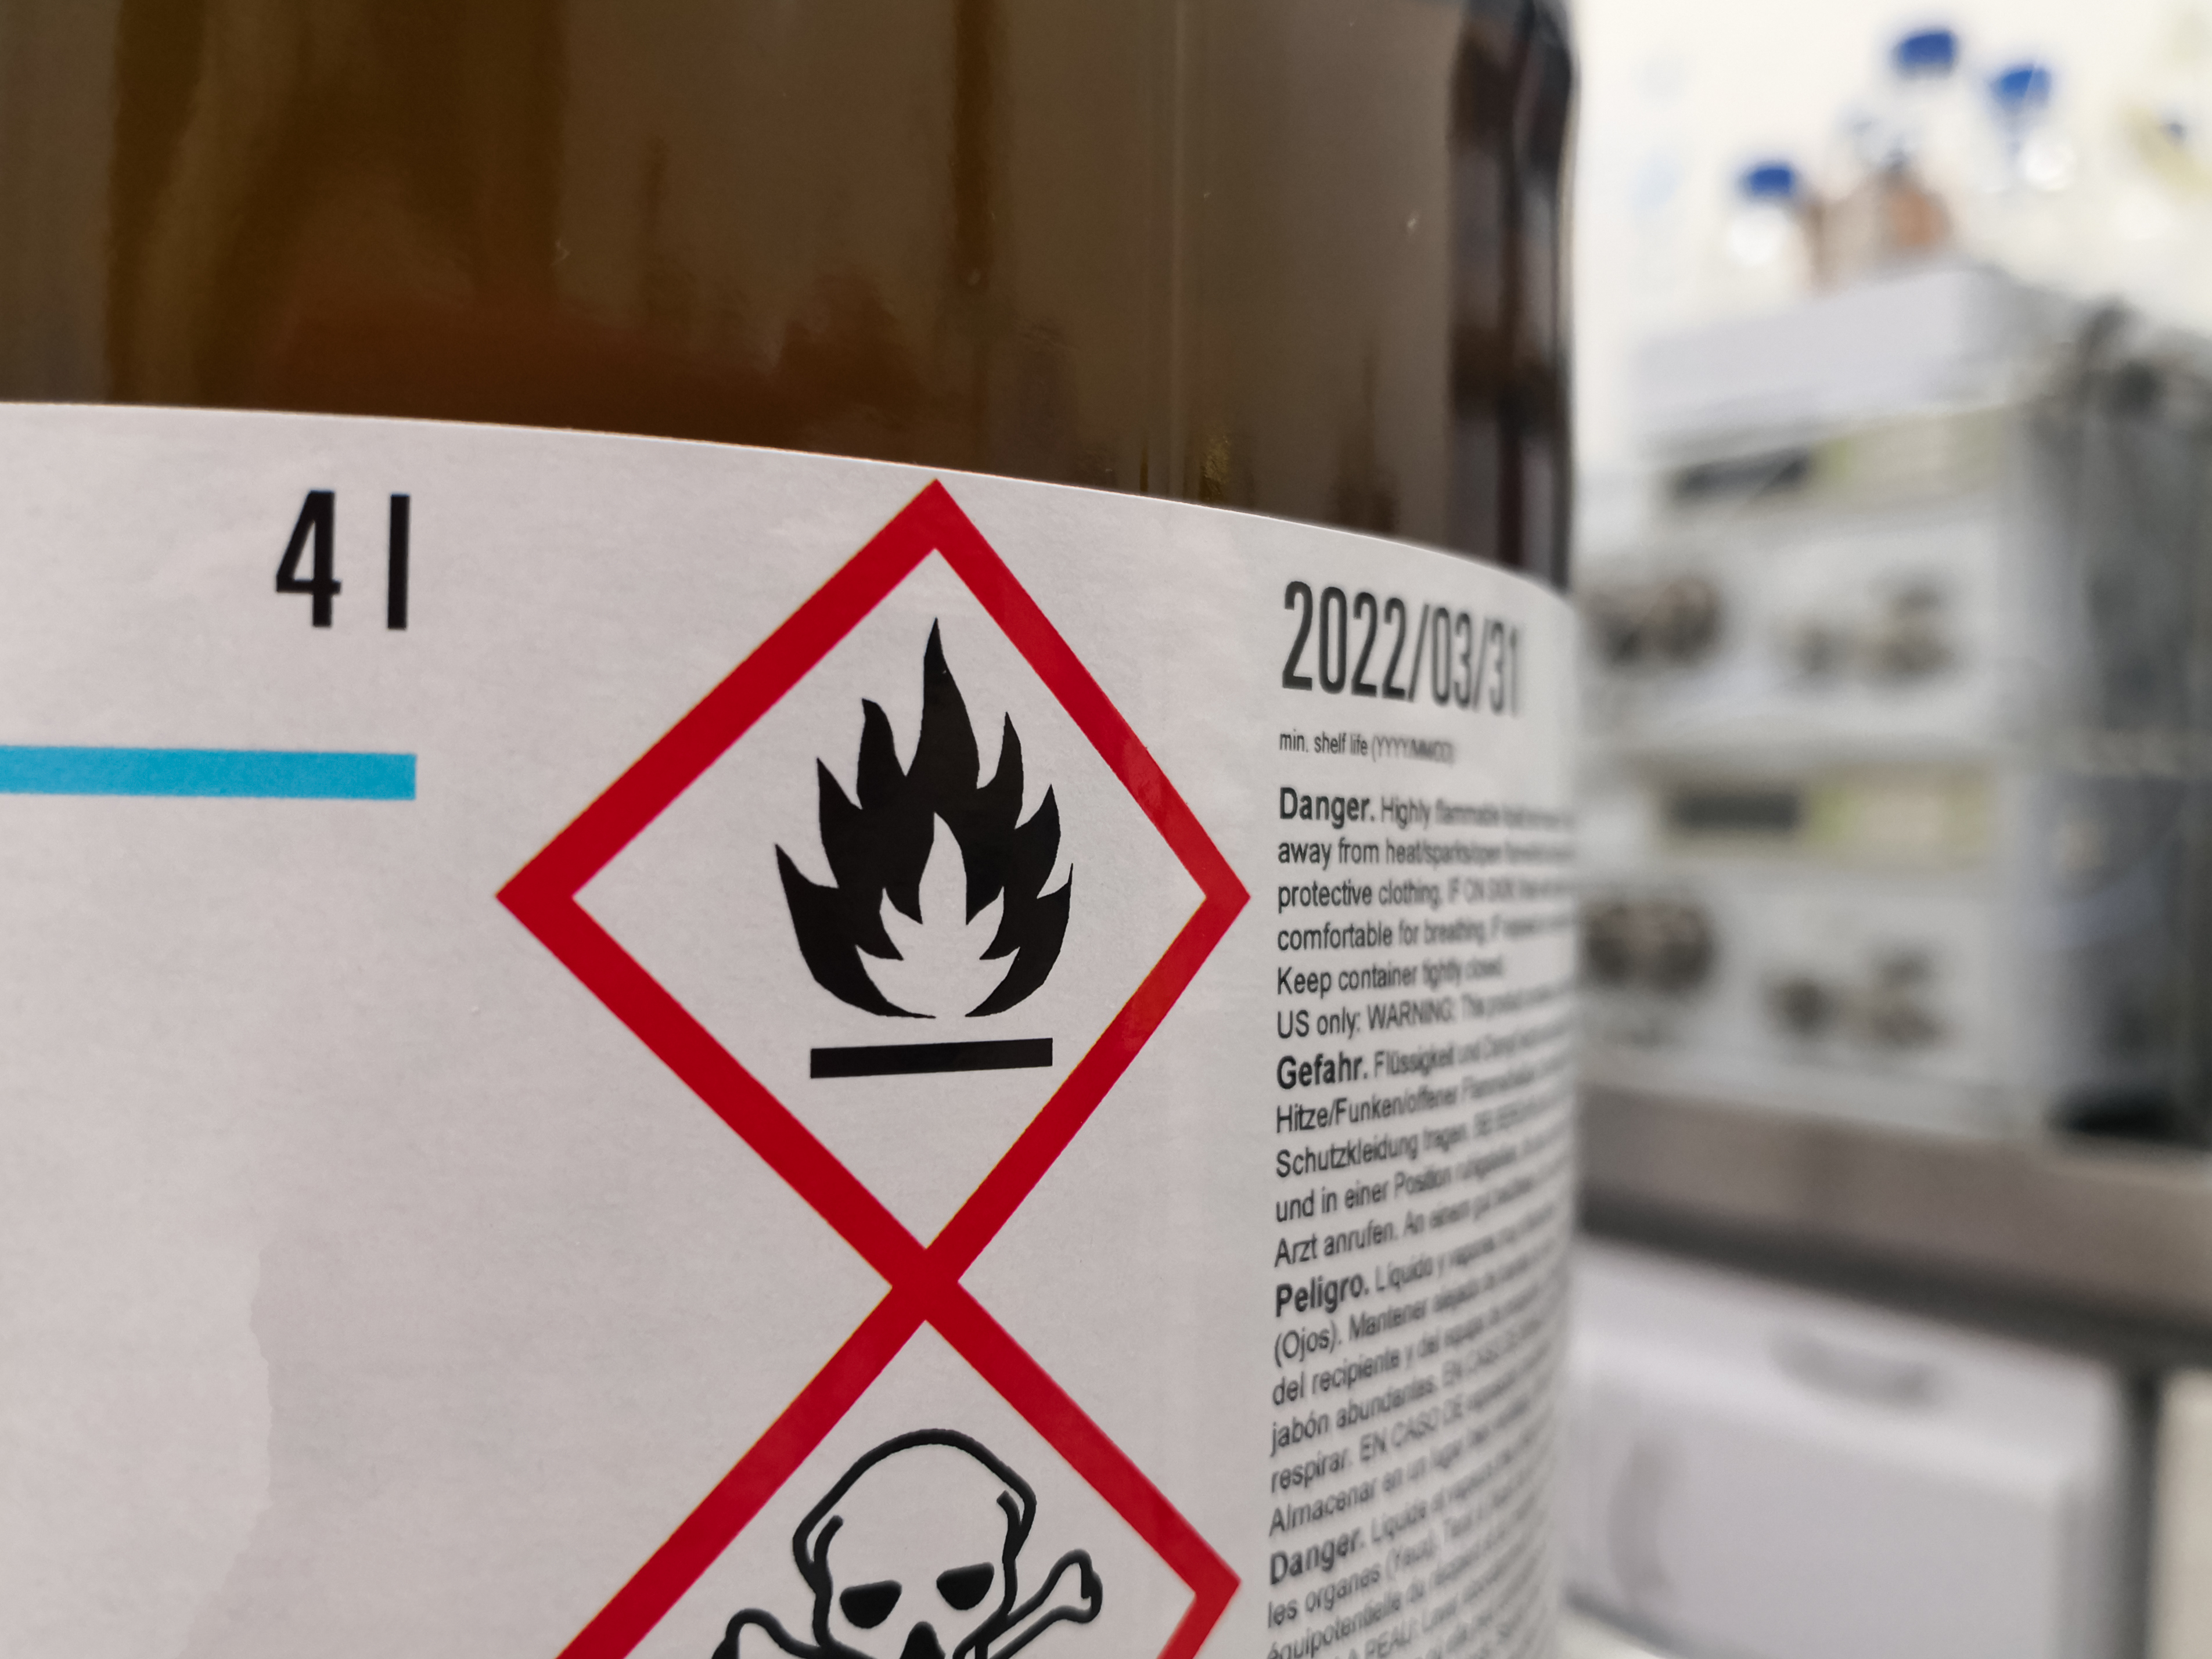 Lab Managers: How to Keep Your Cool for Lab Fire Code Compliance